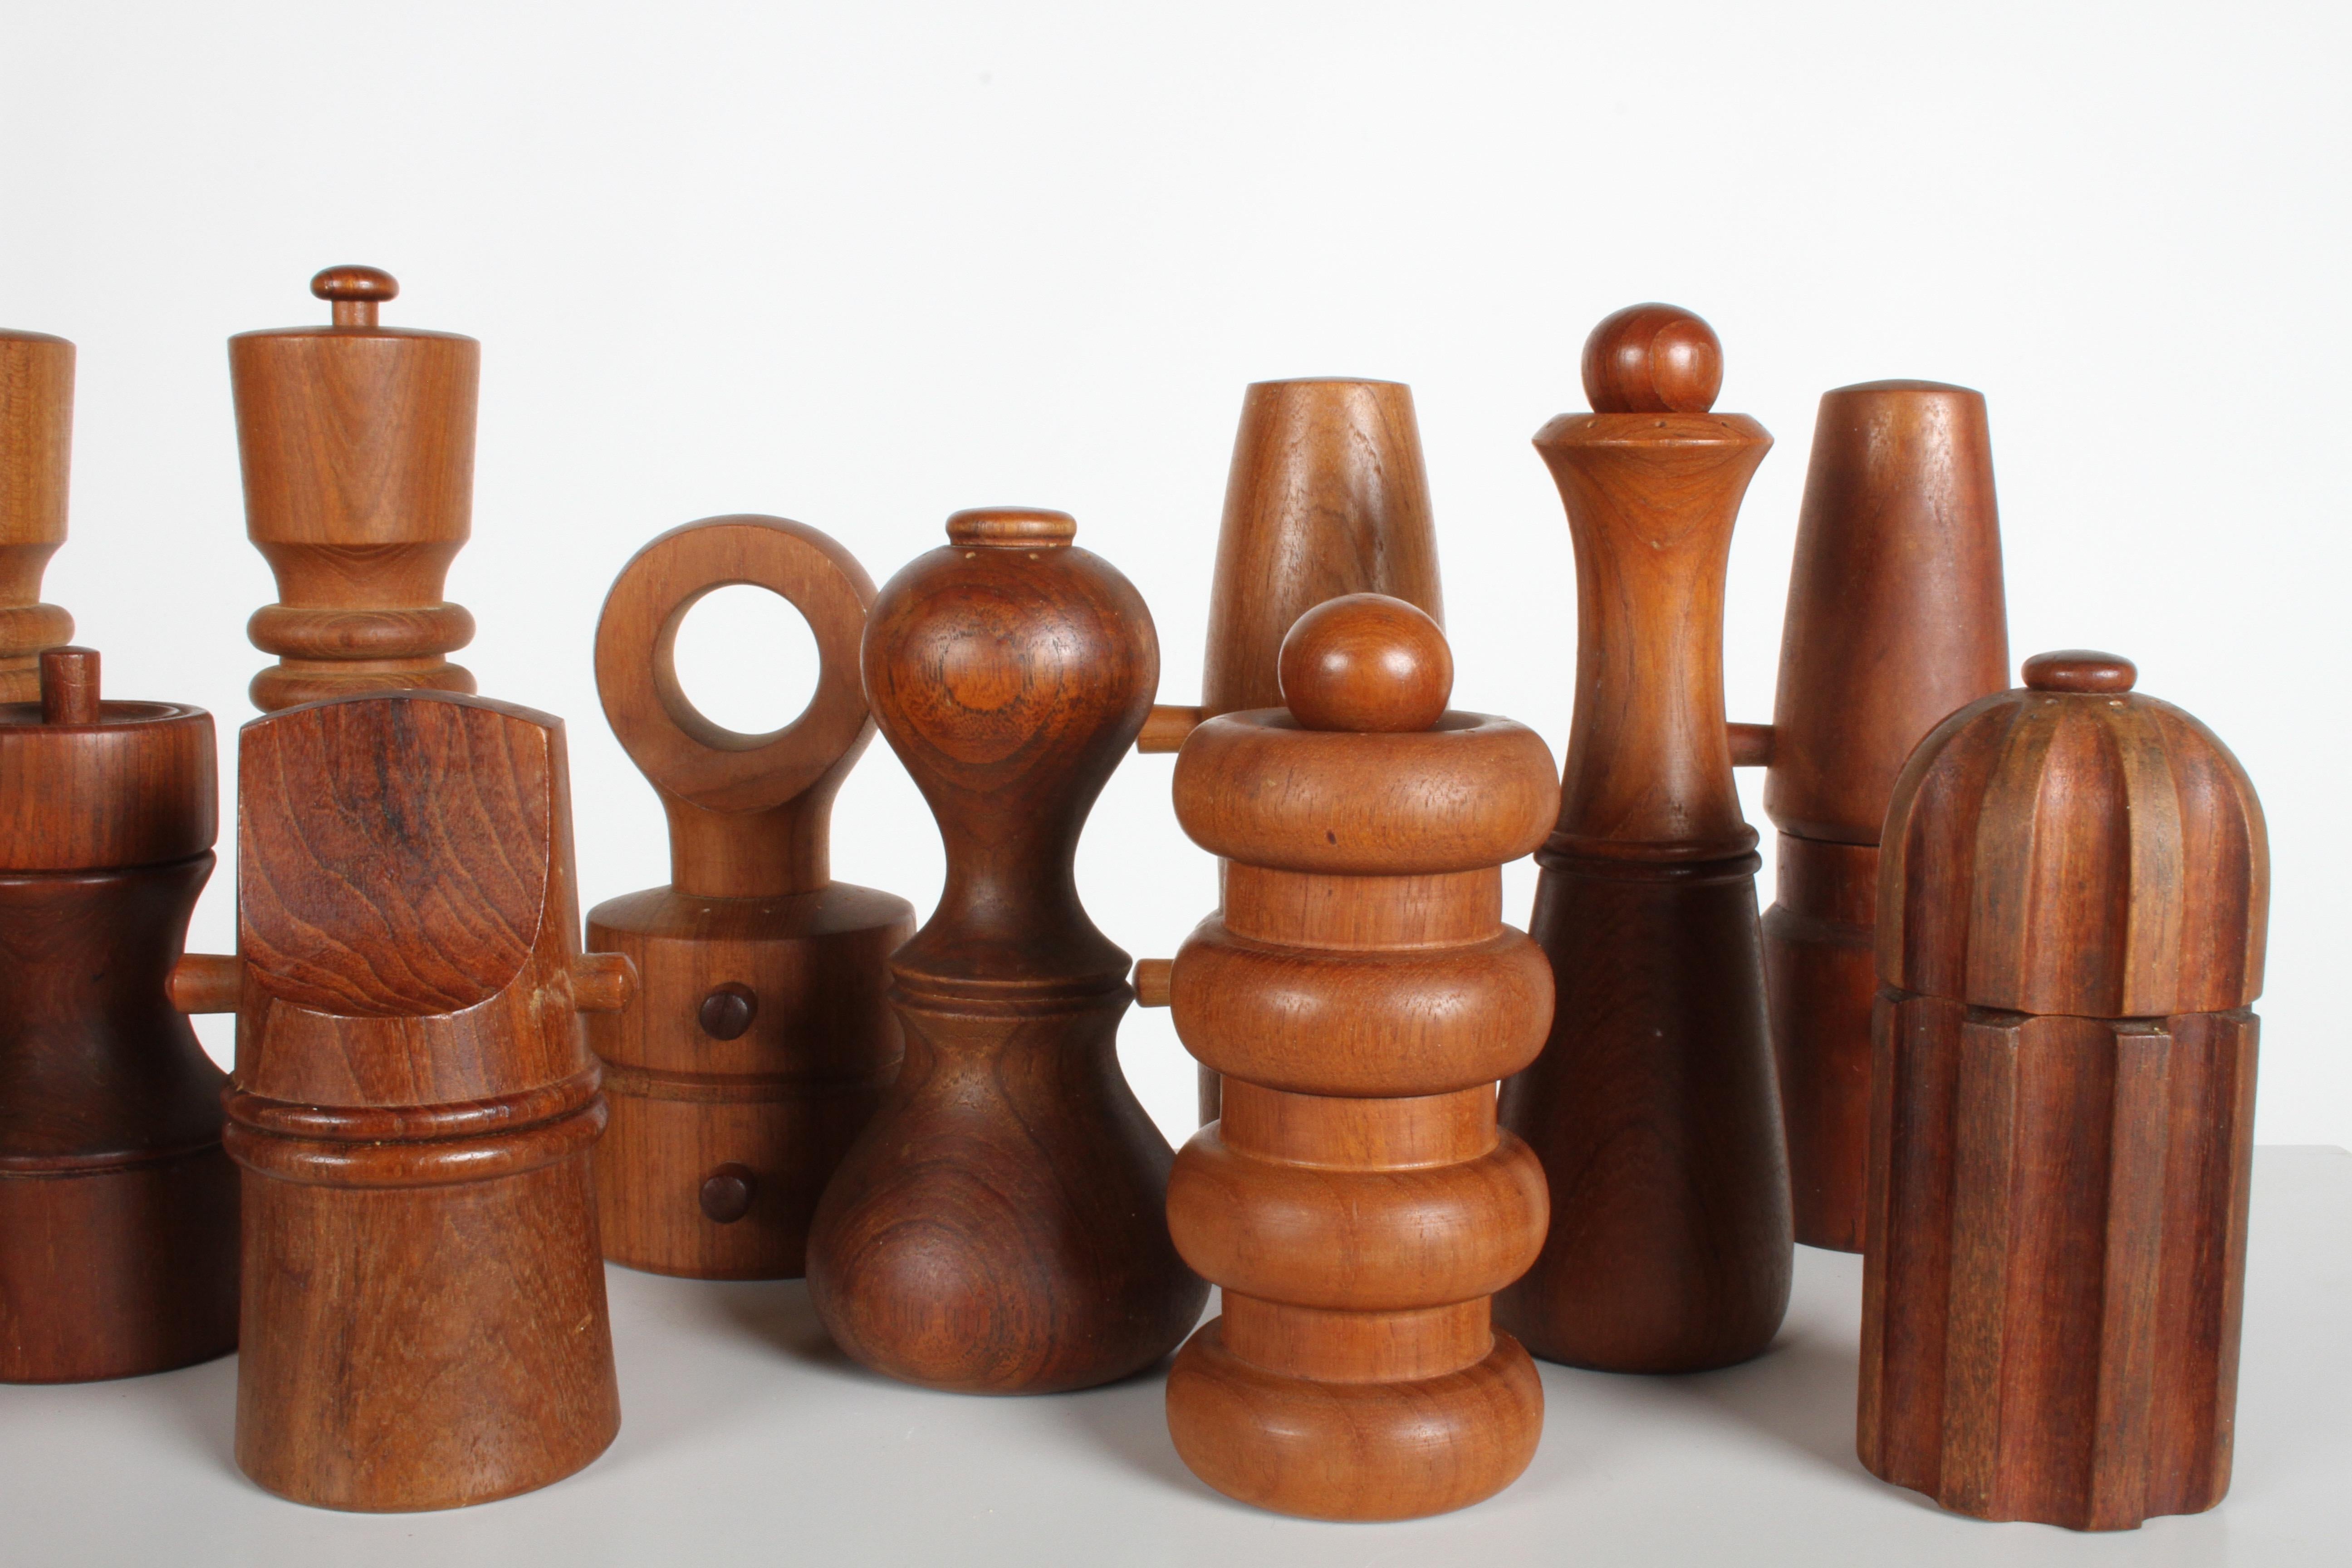 Large Dansk Collection of Pepper Mills and Salt Shakers, IHQ 2